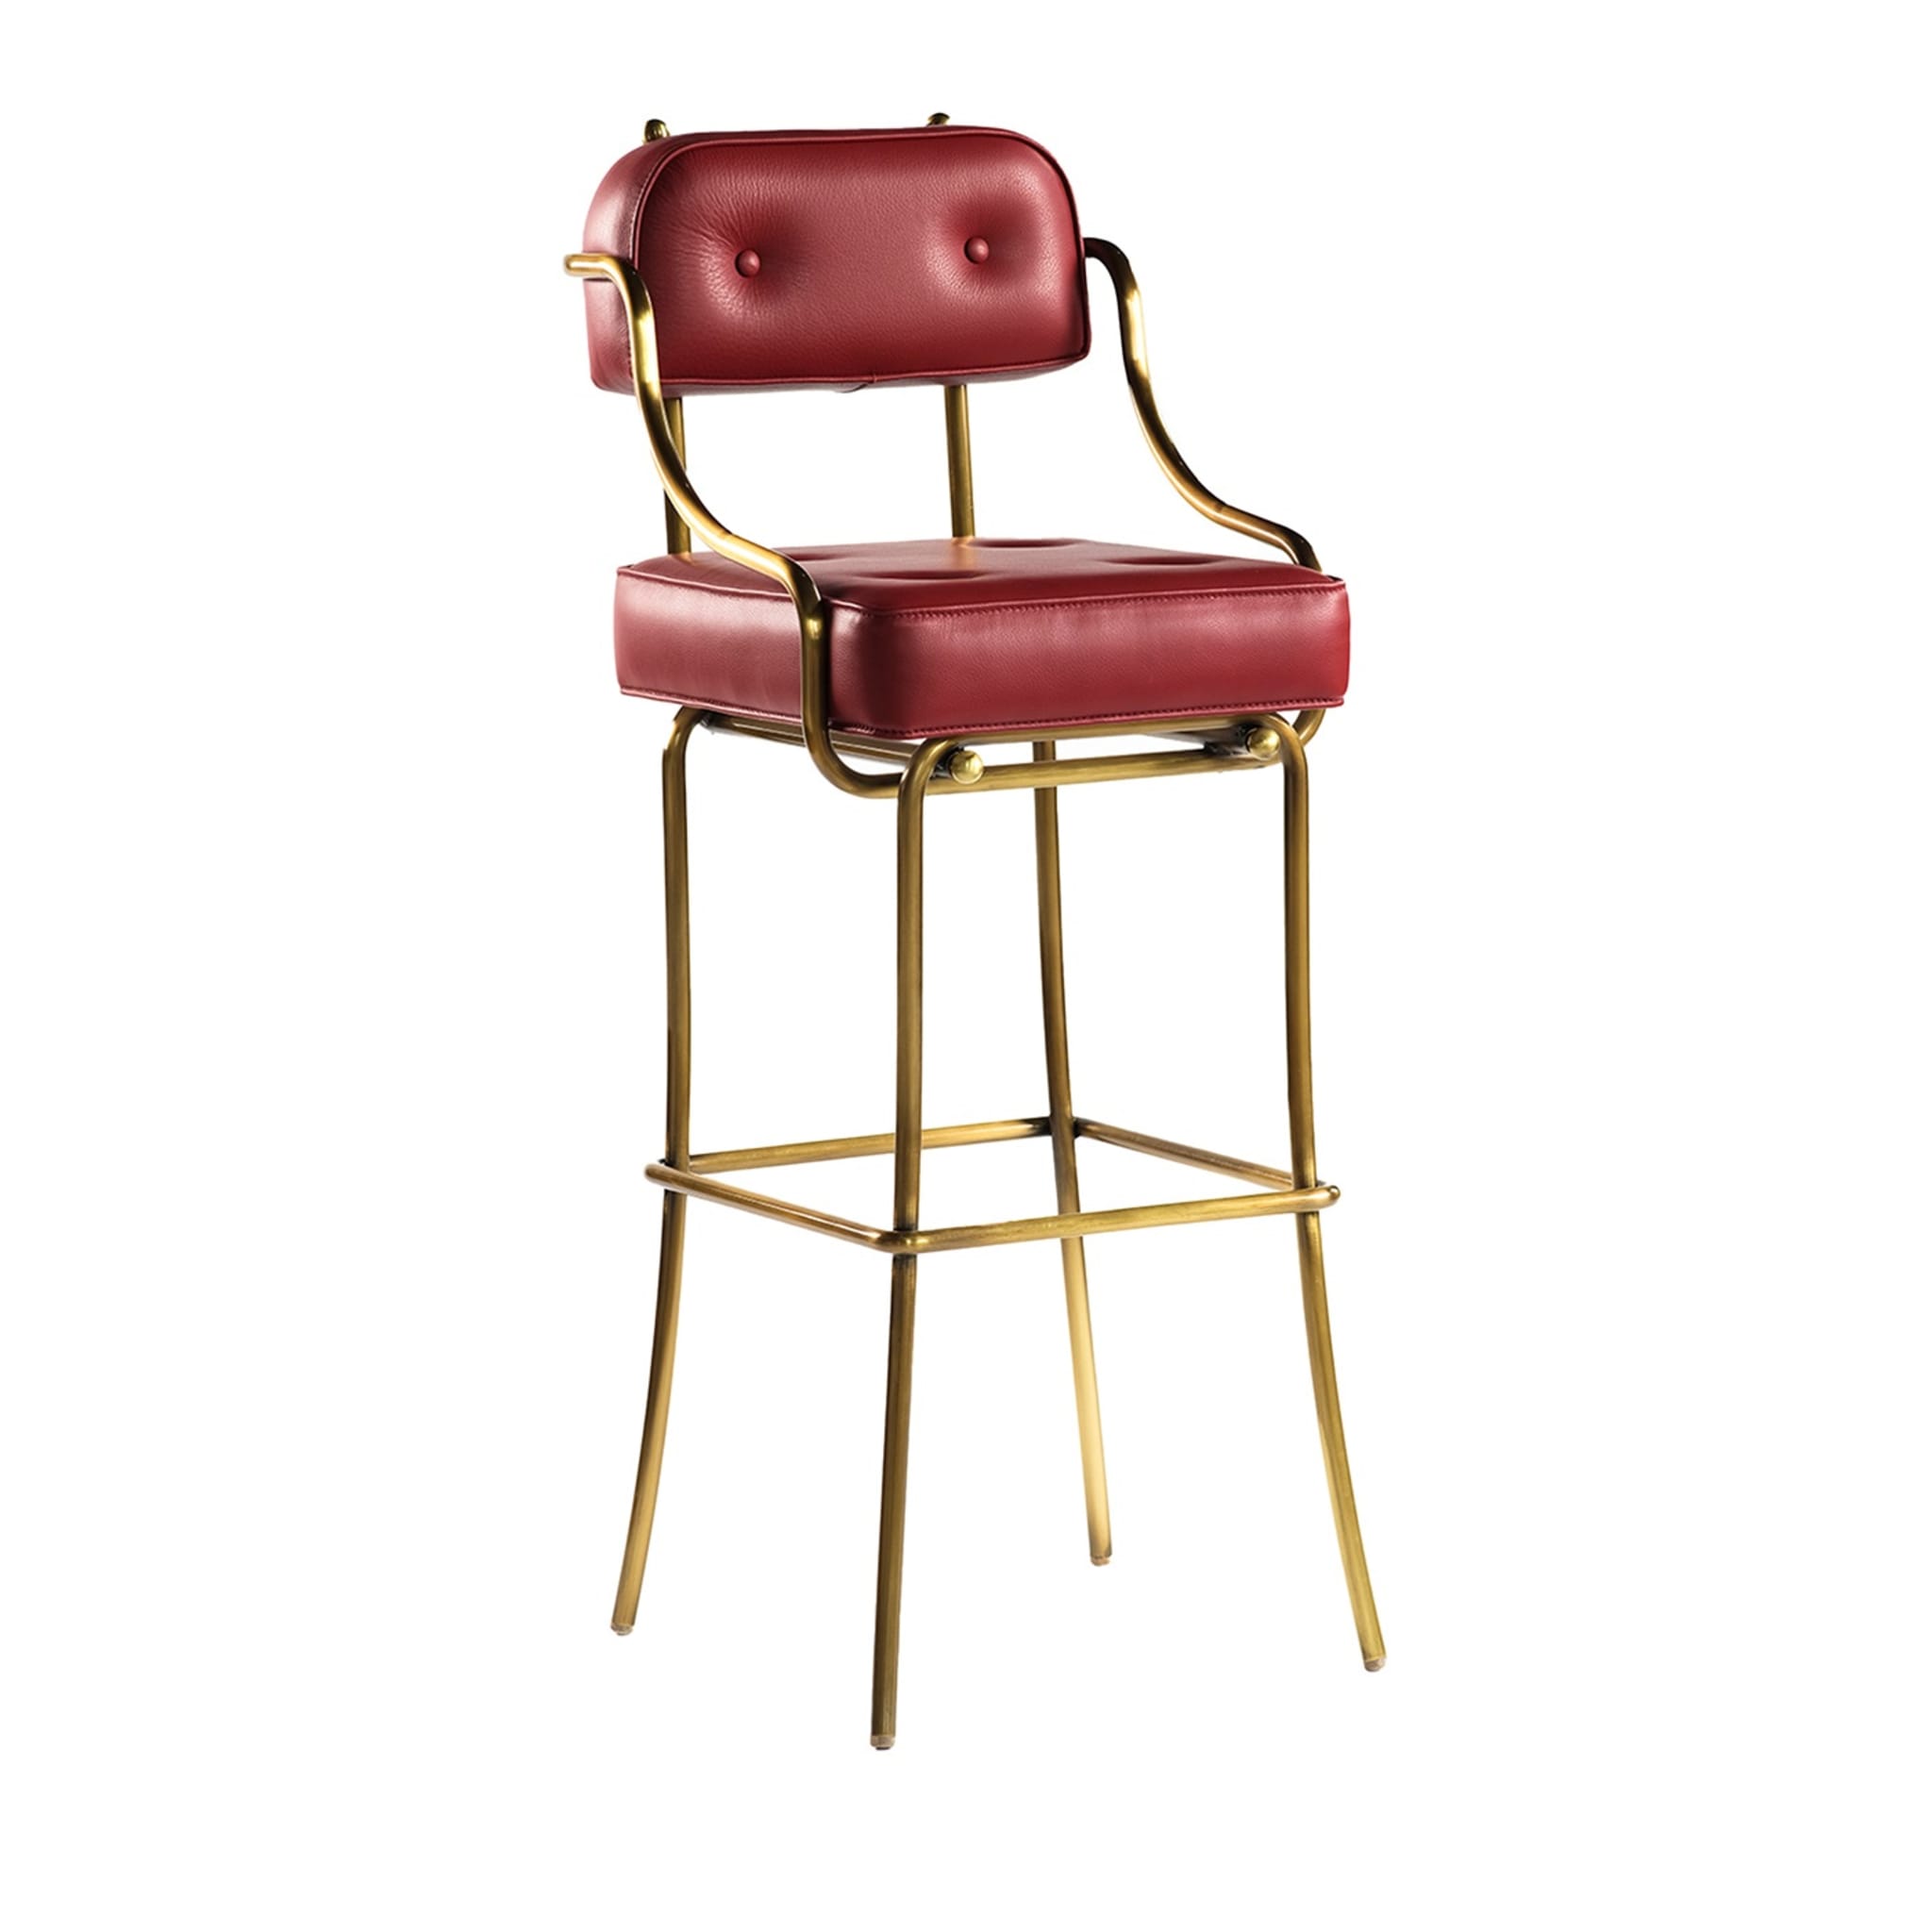 The Red Bar Stool  - Main view